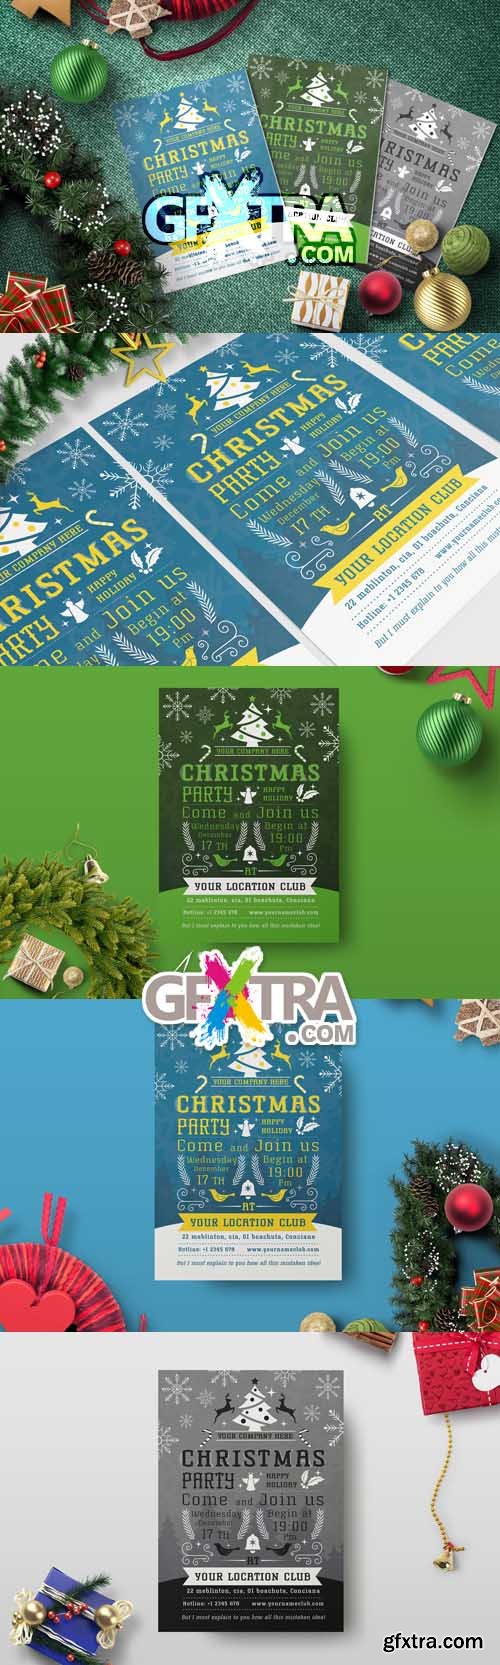 Christmas Party - Flyer Template 2